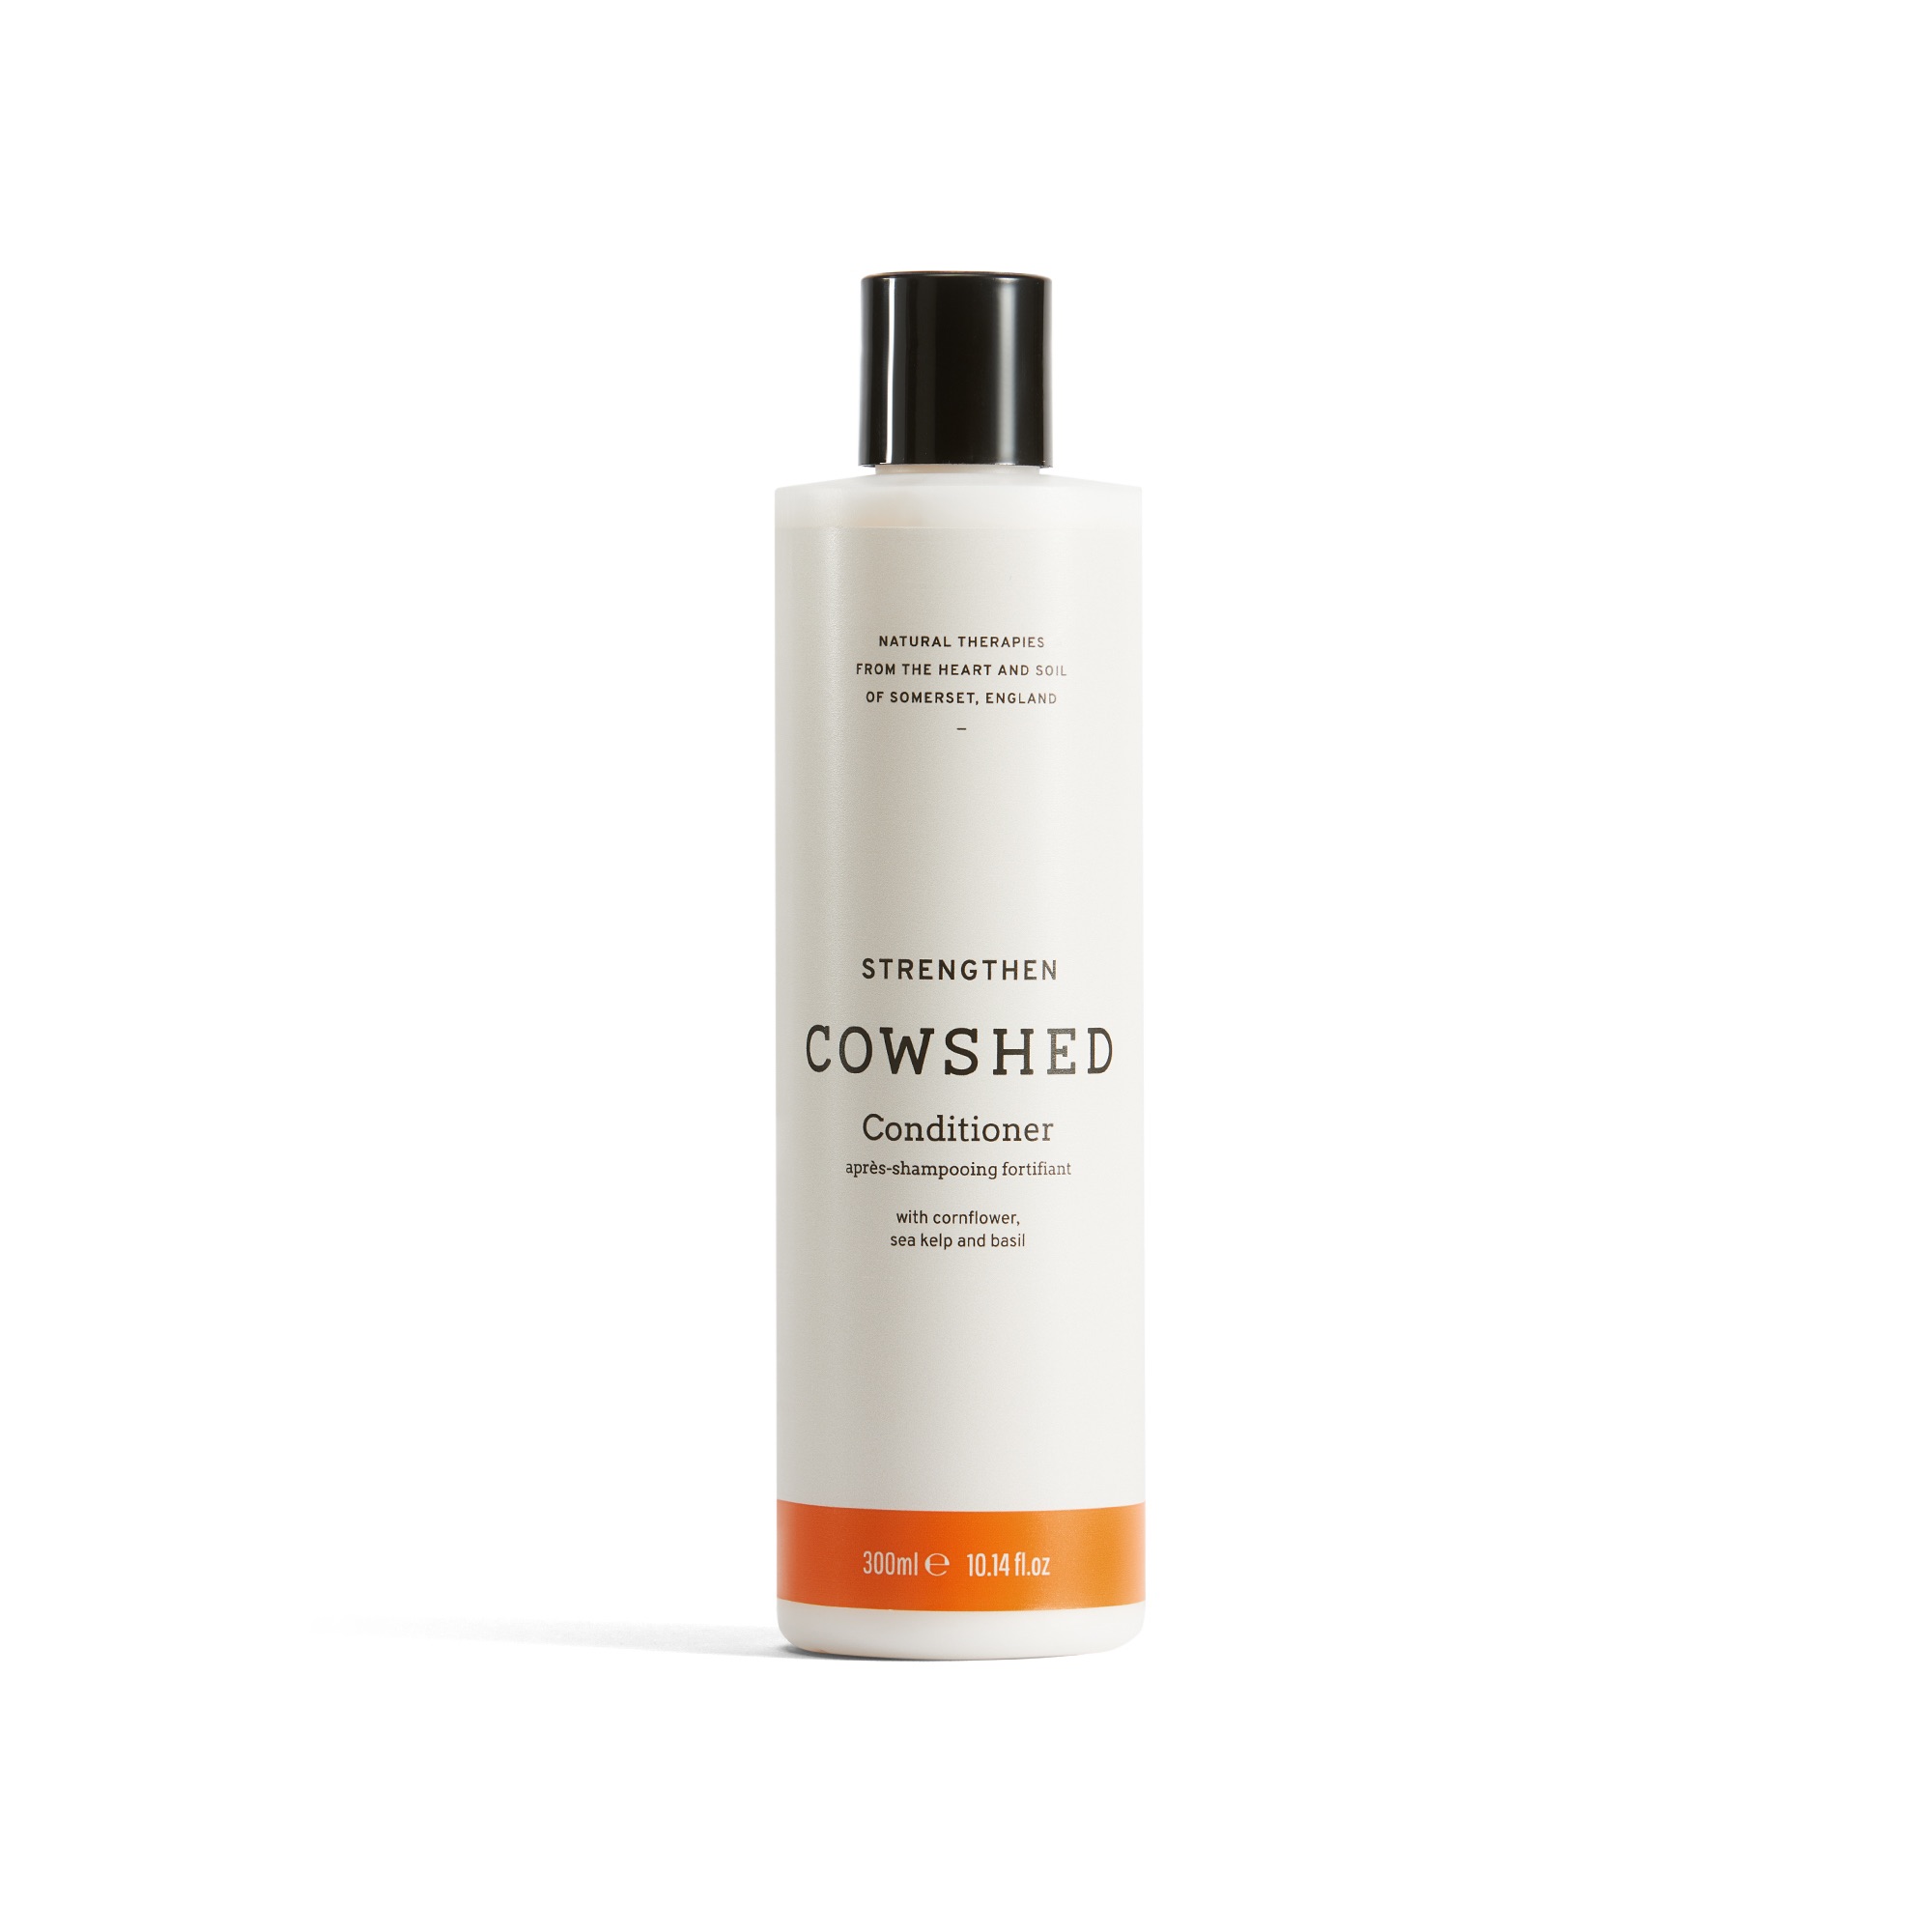 Cowshed STRENGTHEN Conditioner (Wild Cow Strengthening Conditioner) 300ml